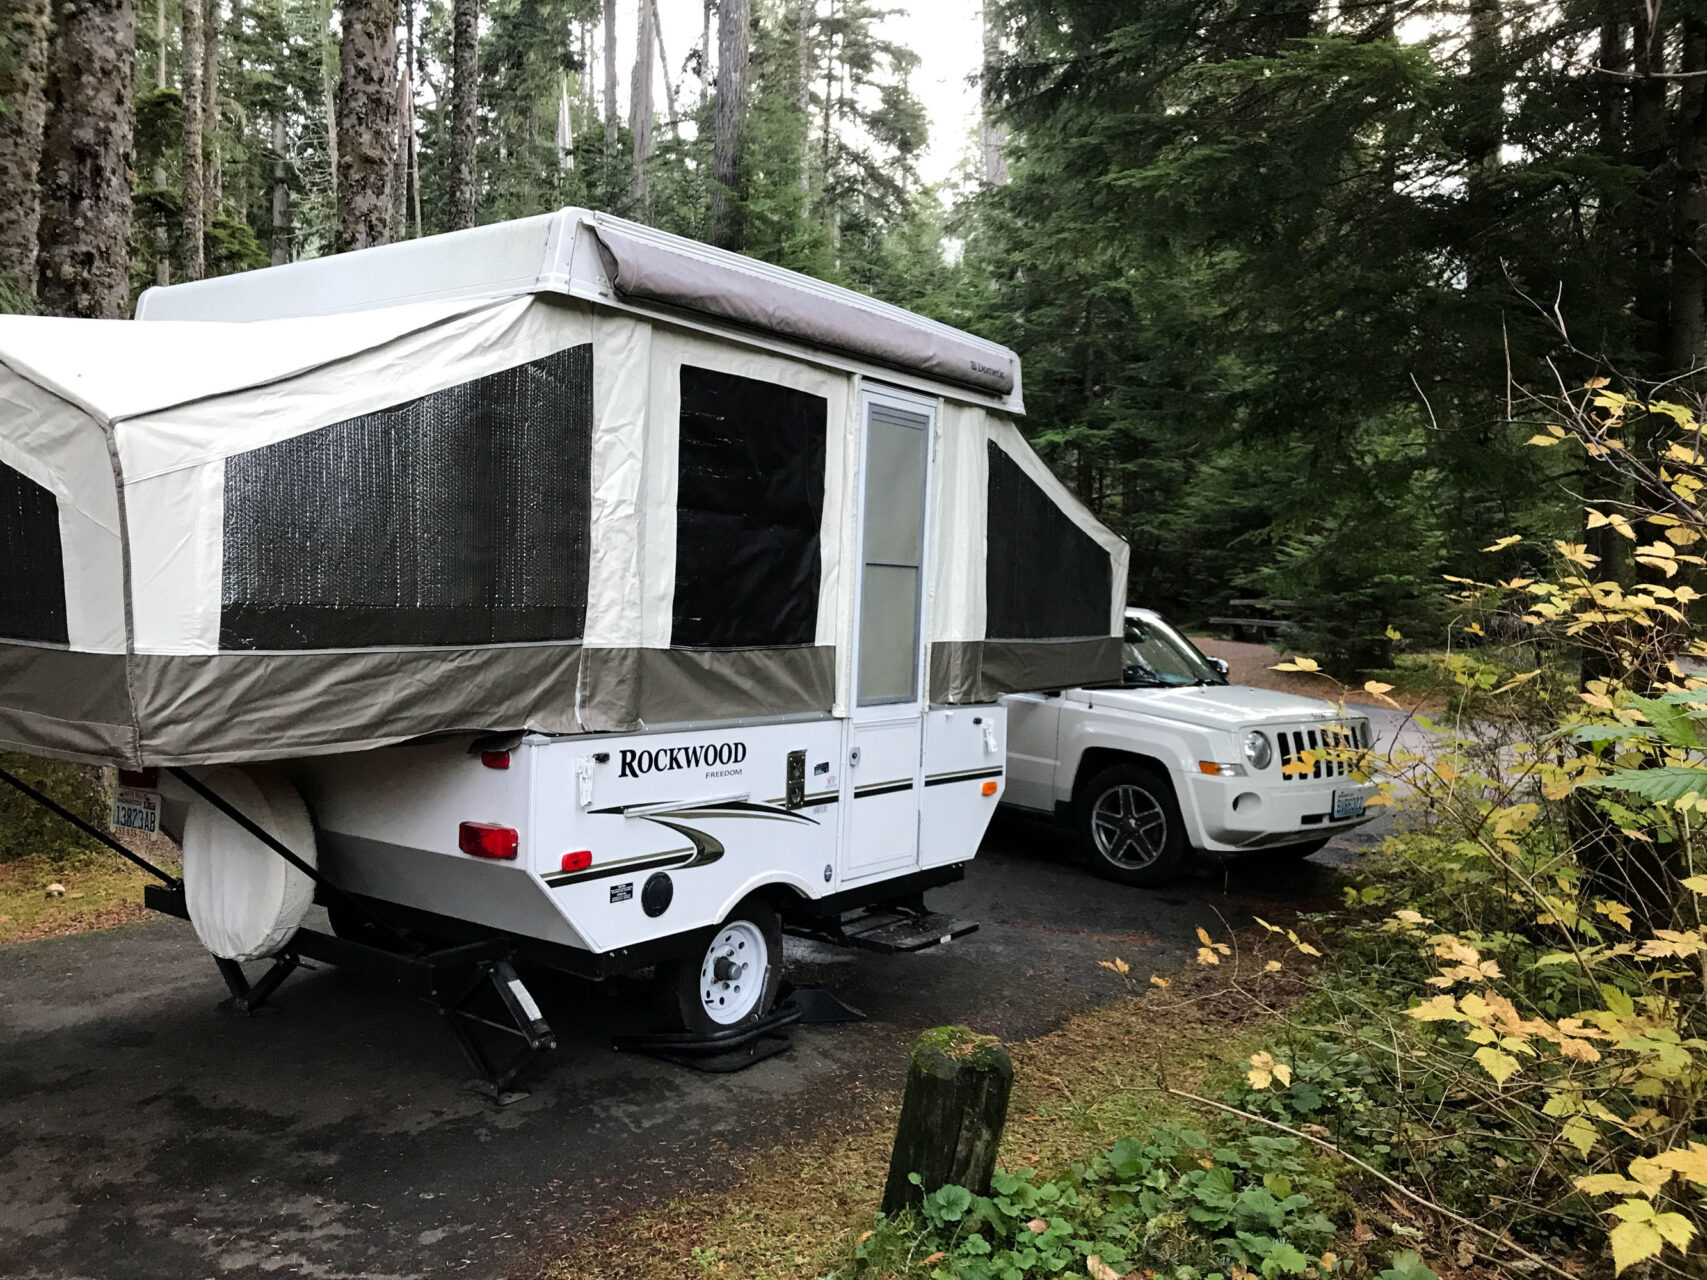 Pop-up trailer camping at Heart O' the Hills in Olympic National Park.